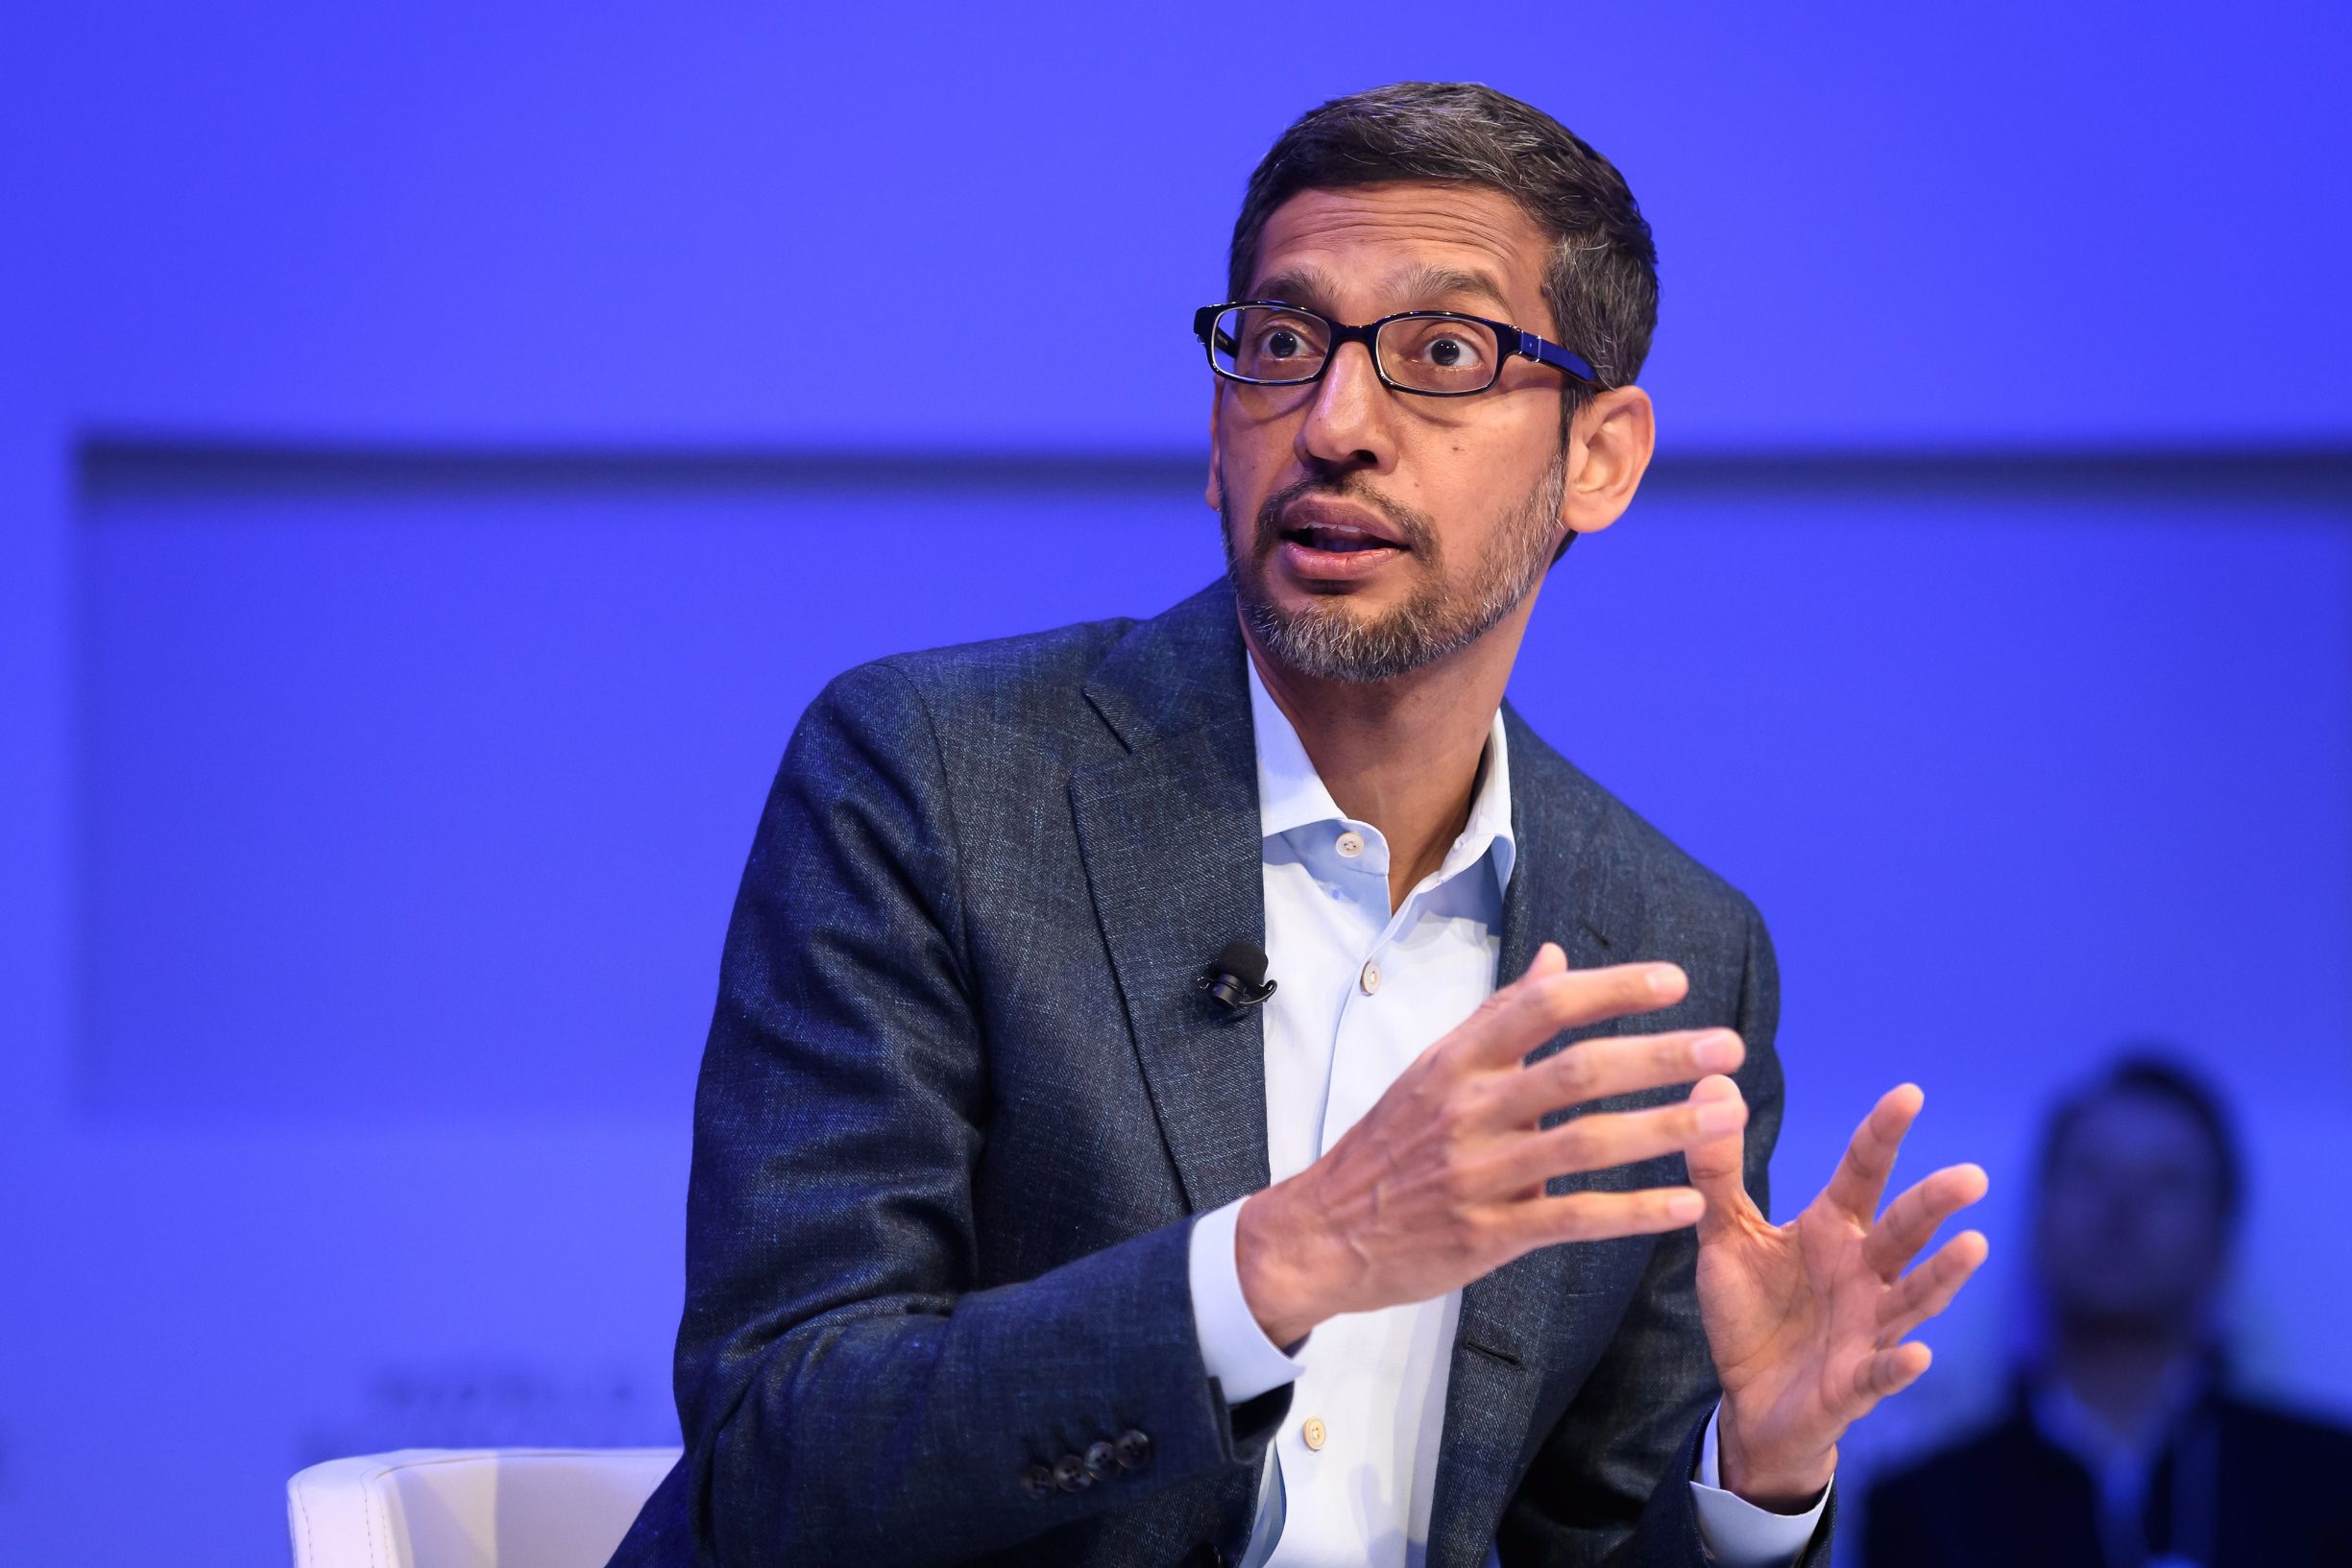 Alphabet CEO Sundar Pichai gestures during a session at the World Economic Forum (WEF) annual meeting in Davos, on January 22, 2020. (Photo by Fabrice COFFRINI / AFP)